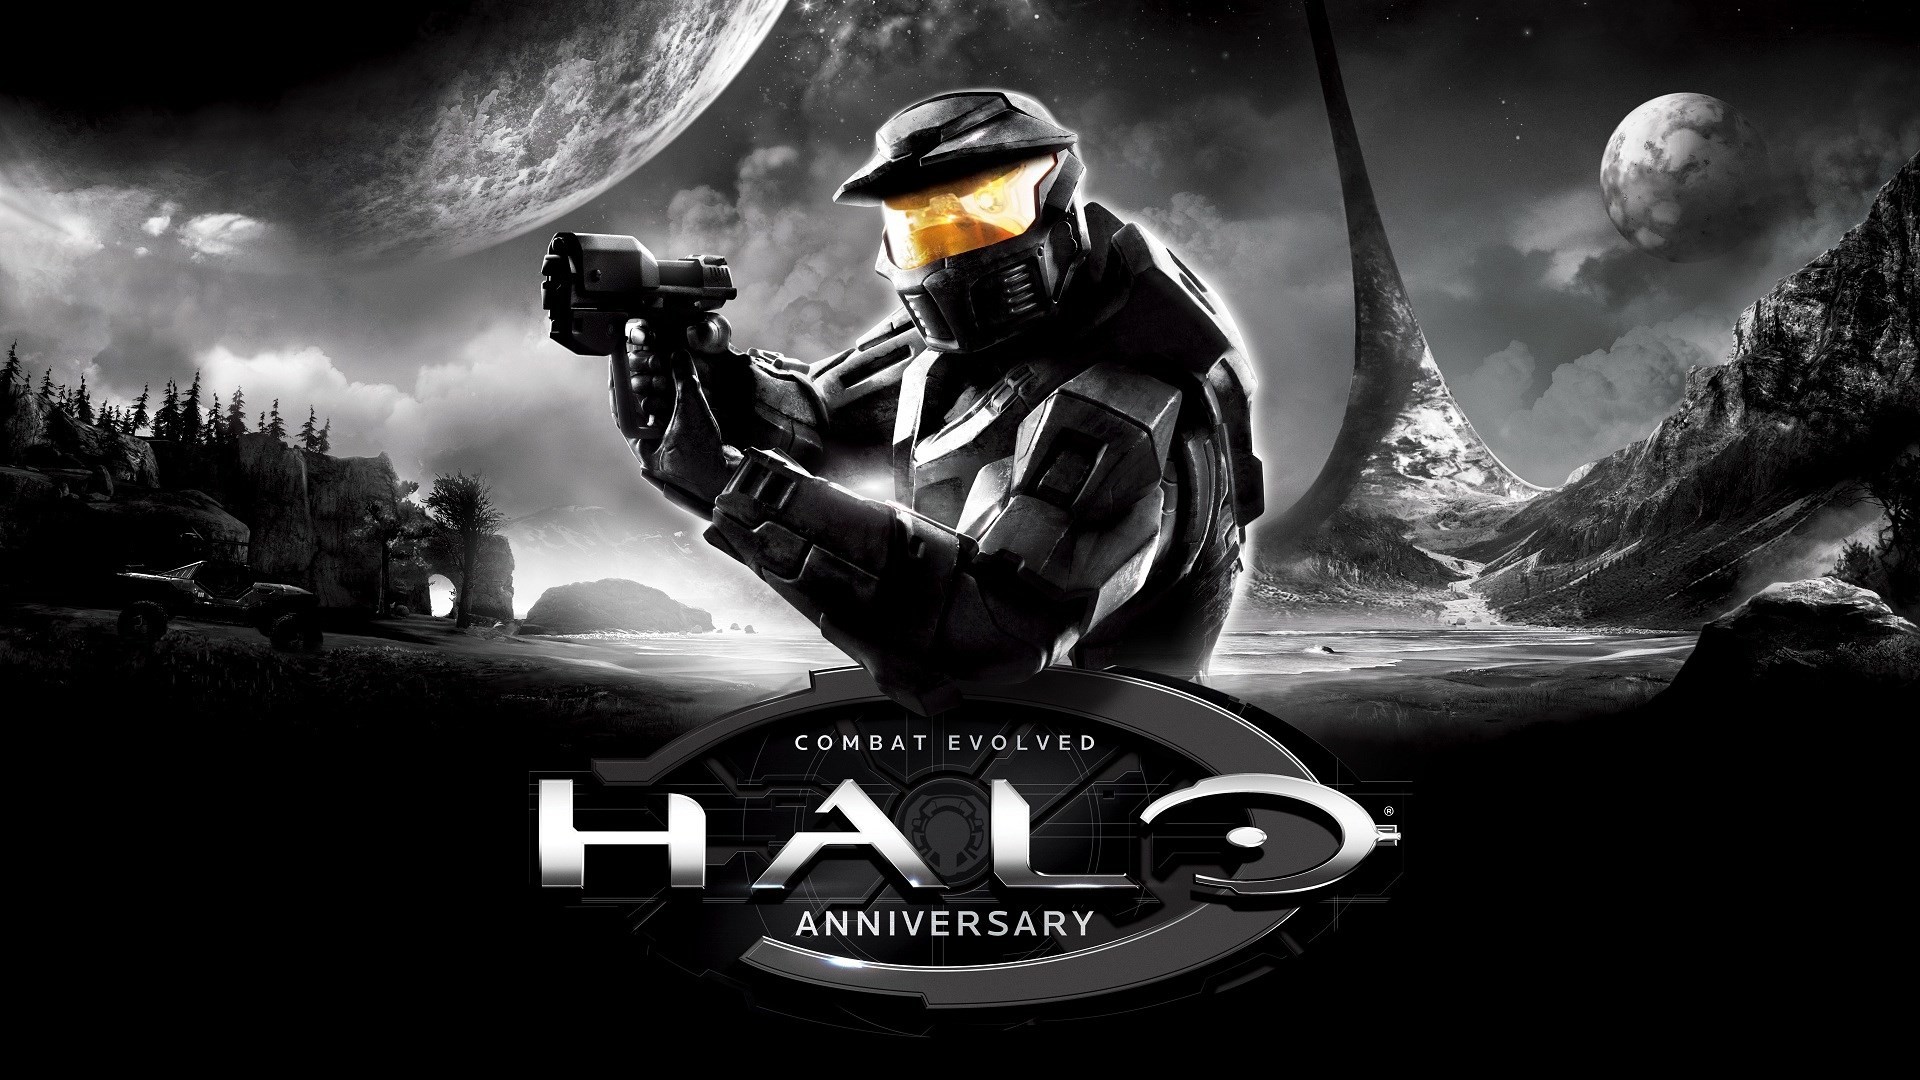 It is the second Halo game to be ported to PC in the new collection, image via Microsoft